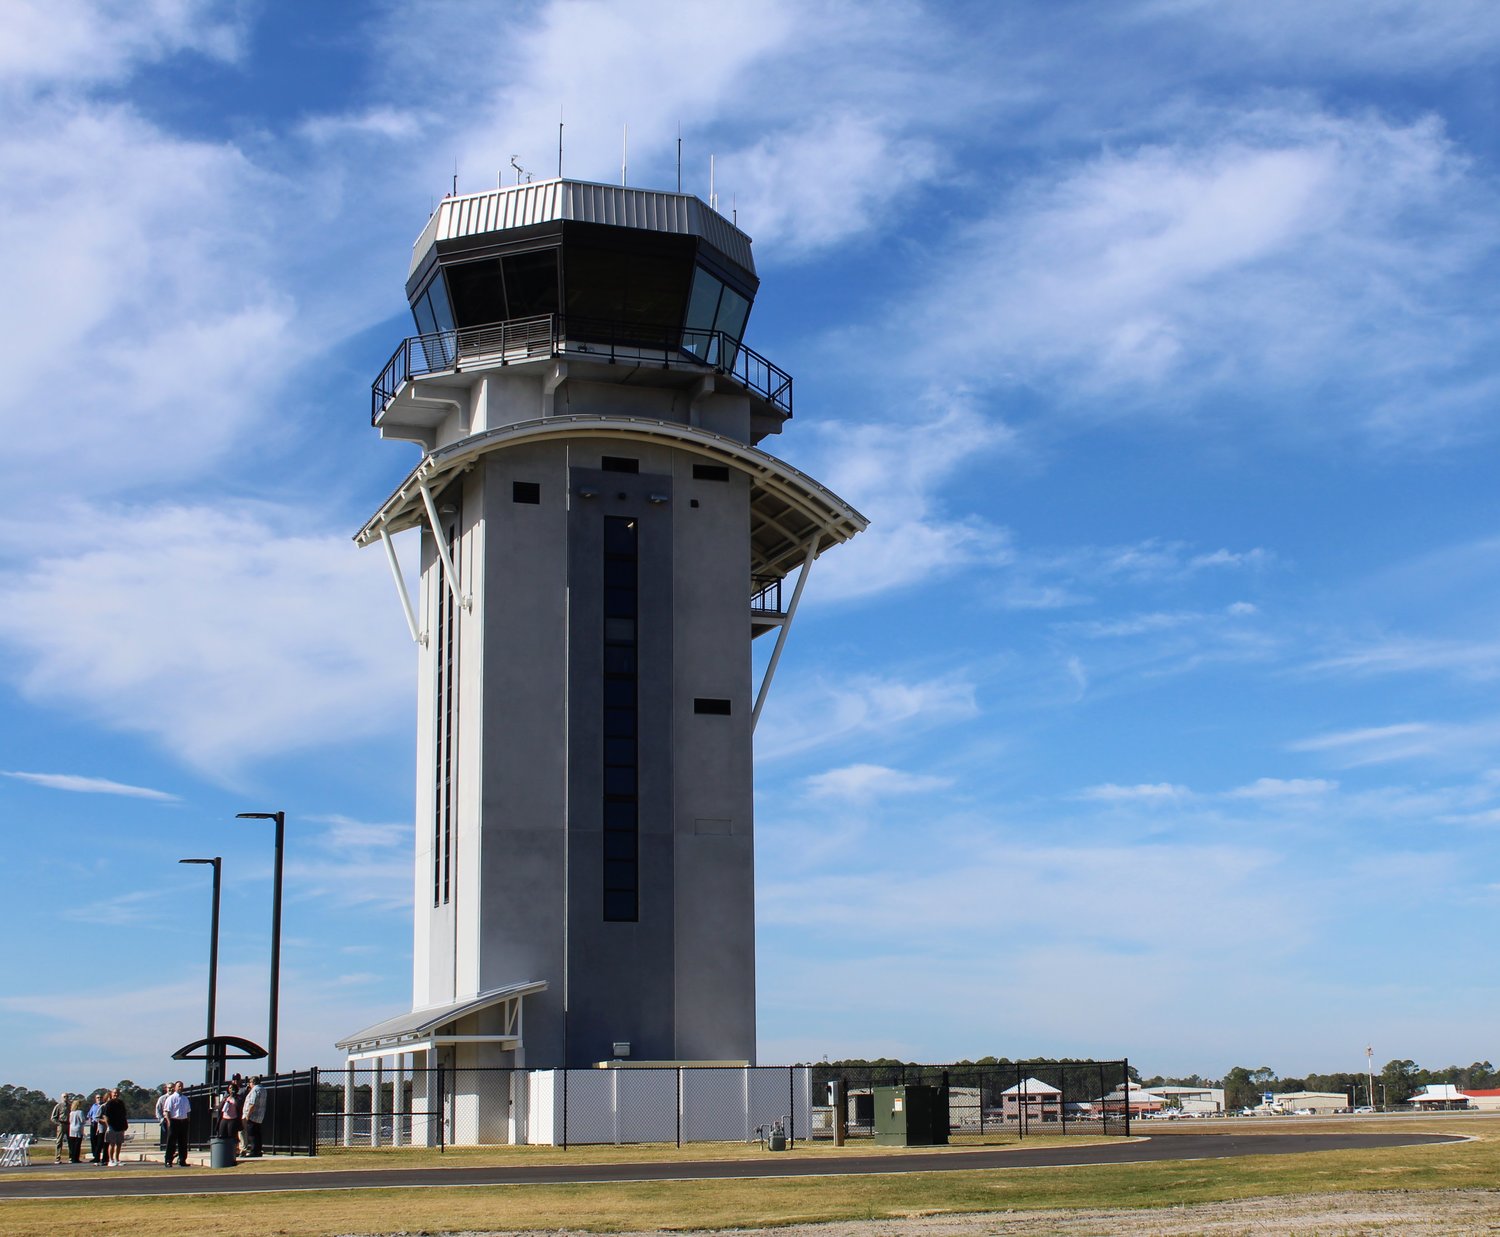 Gulf Shores International Airport will receive a $59,000 grant through the Airport Rescue Grant Program for the fiscal year 2022. The funds are intended to reimburse the airport for operating costs incurred during the COVID-19 pandemic.